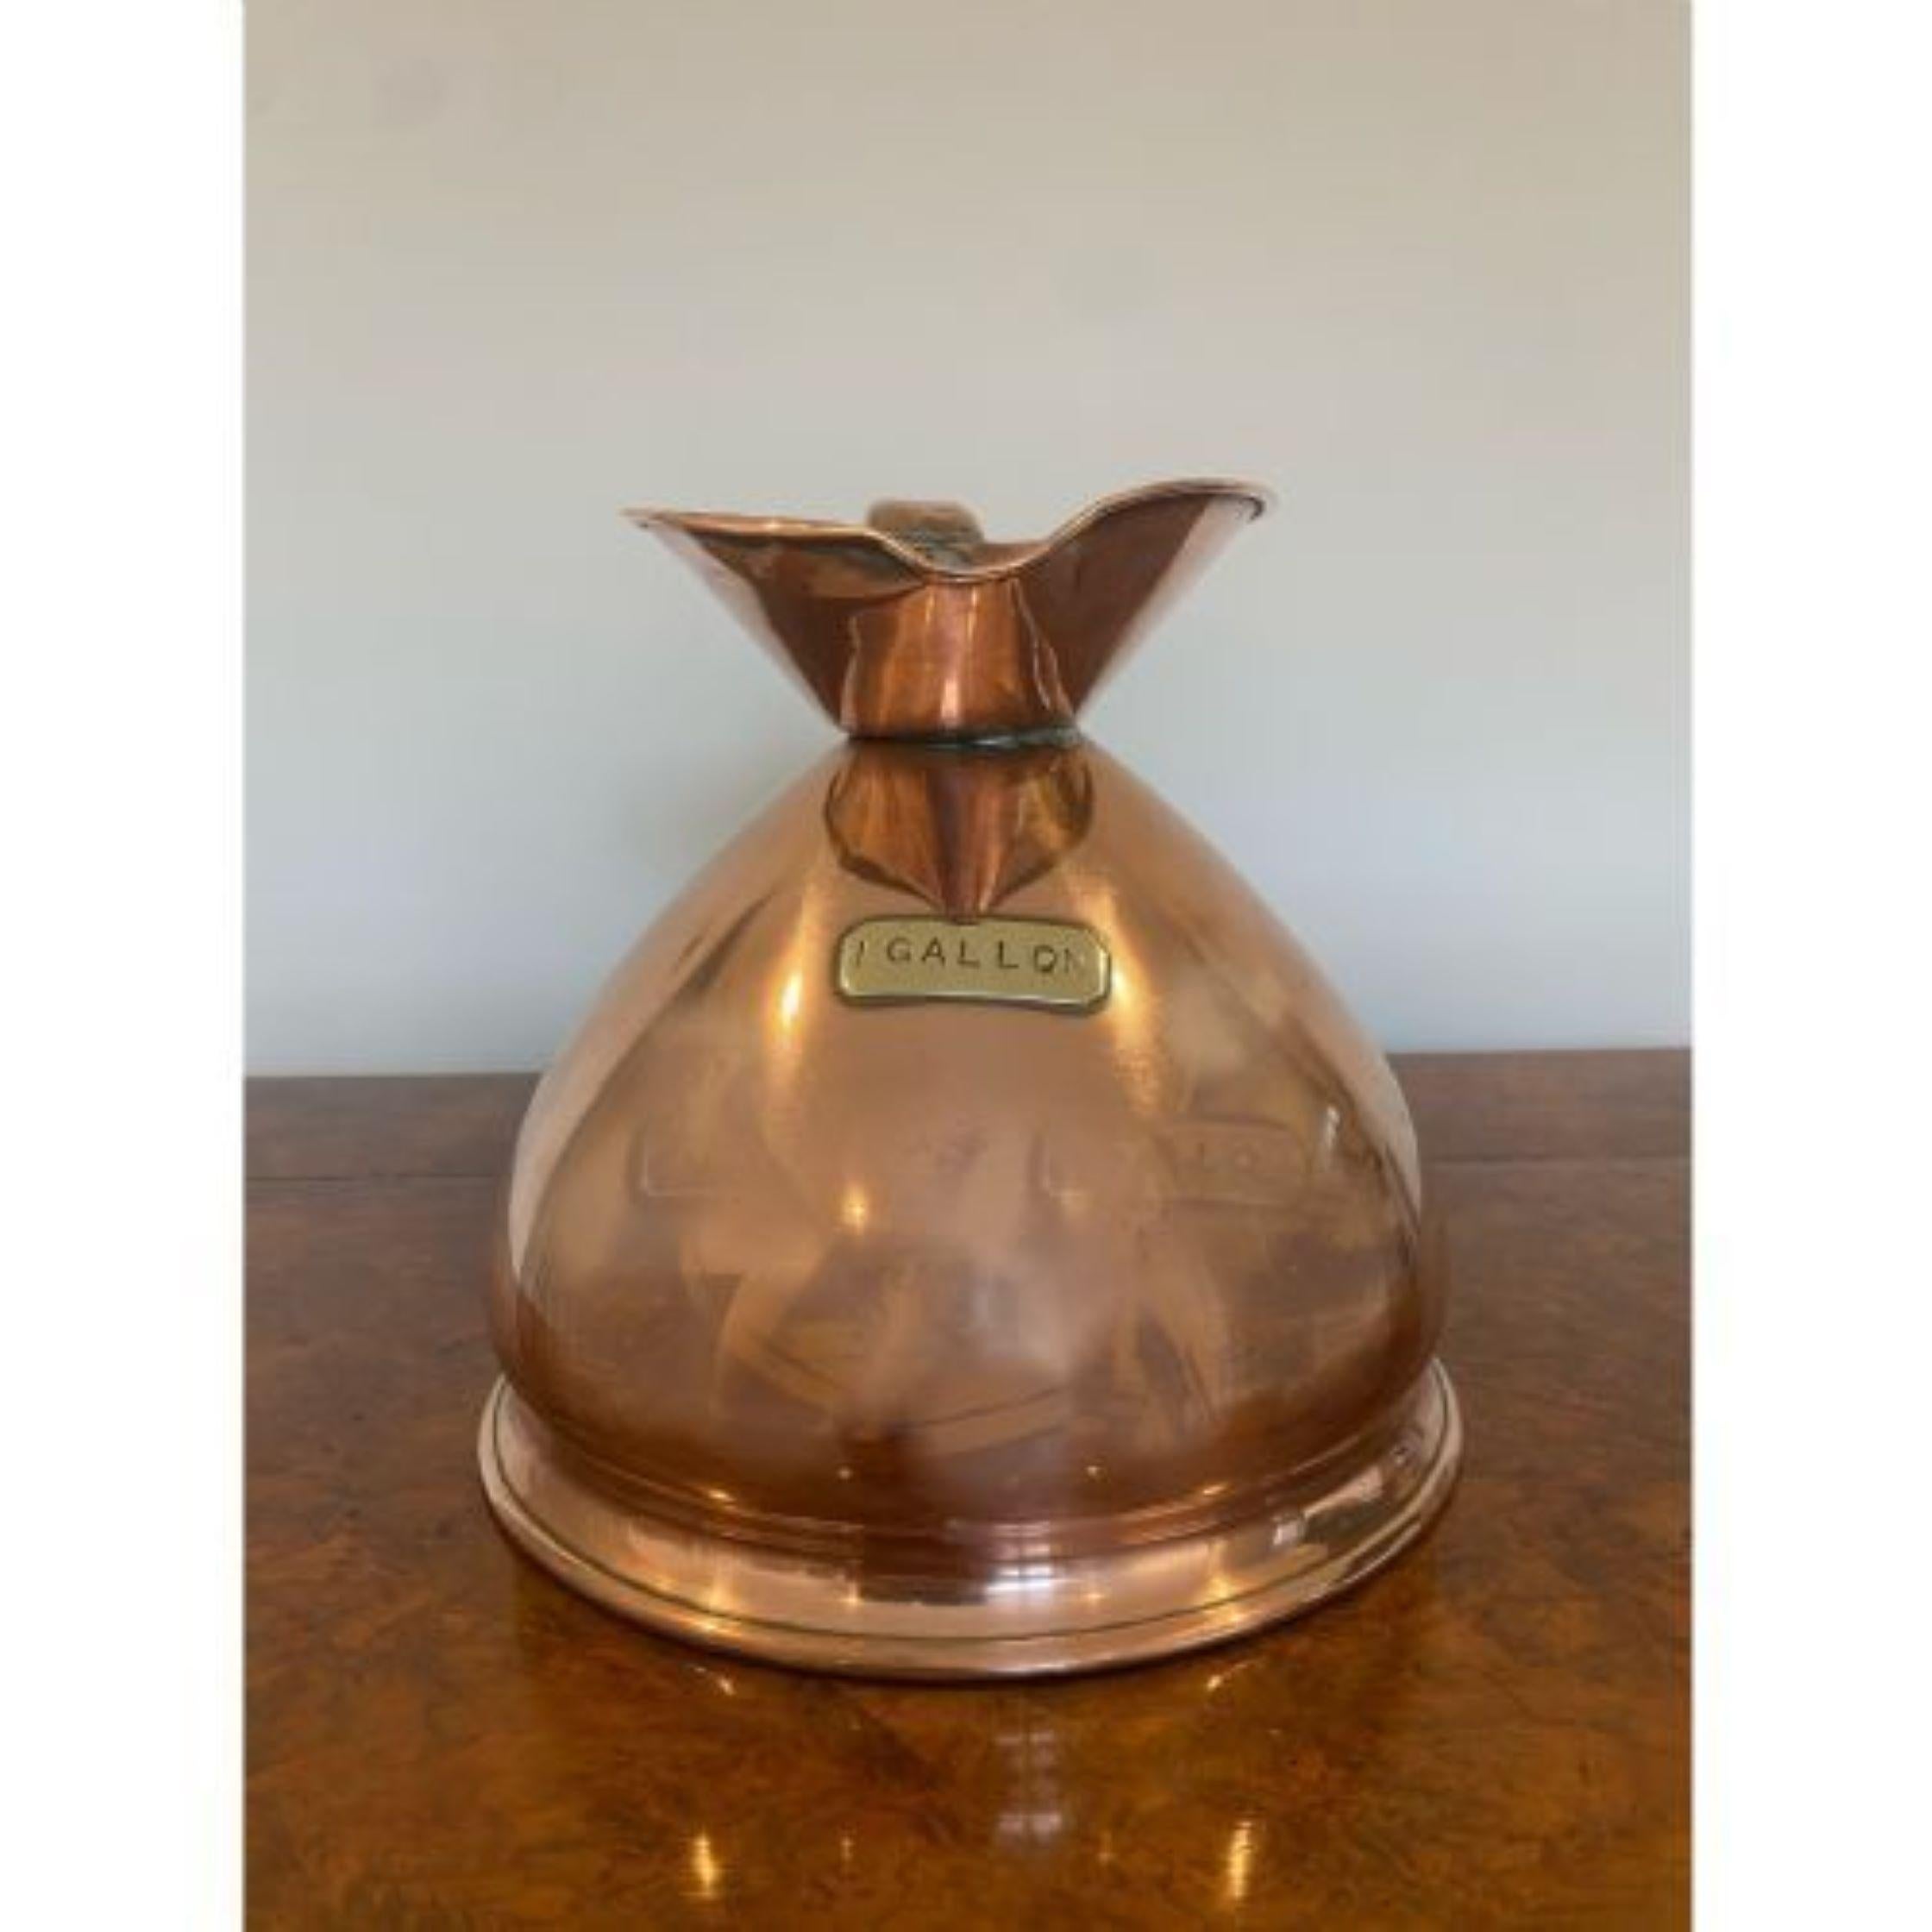 Superb Quality Antique Victorian One Gallon Harvest Jug In Good Condition For Sale In Ipswich, GB